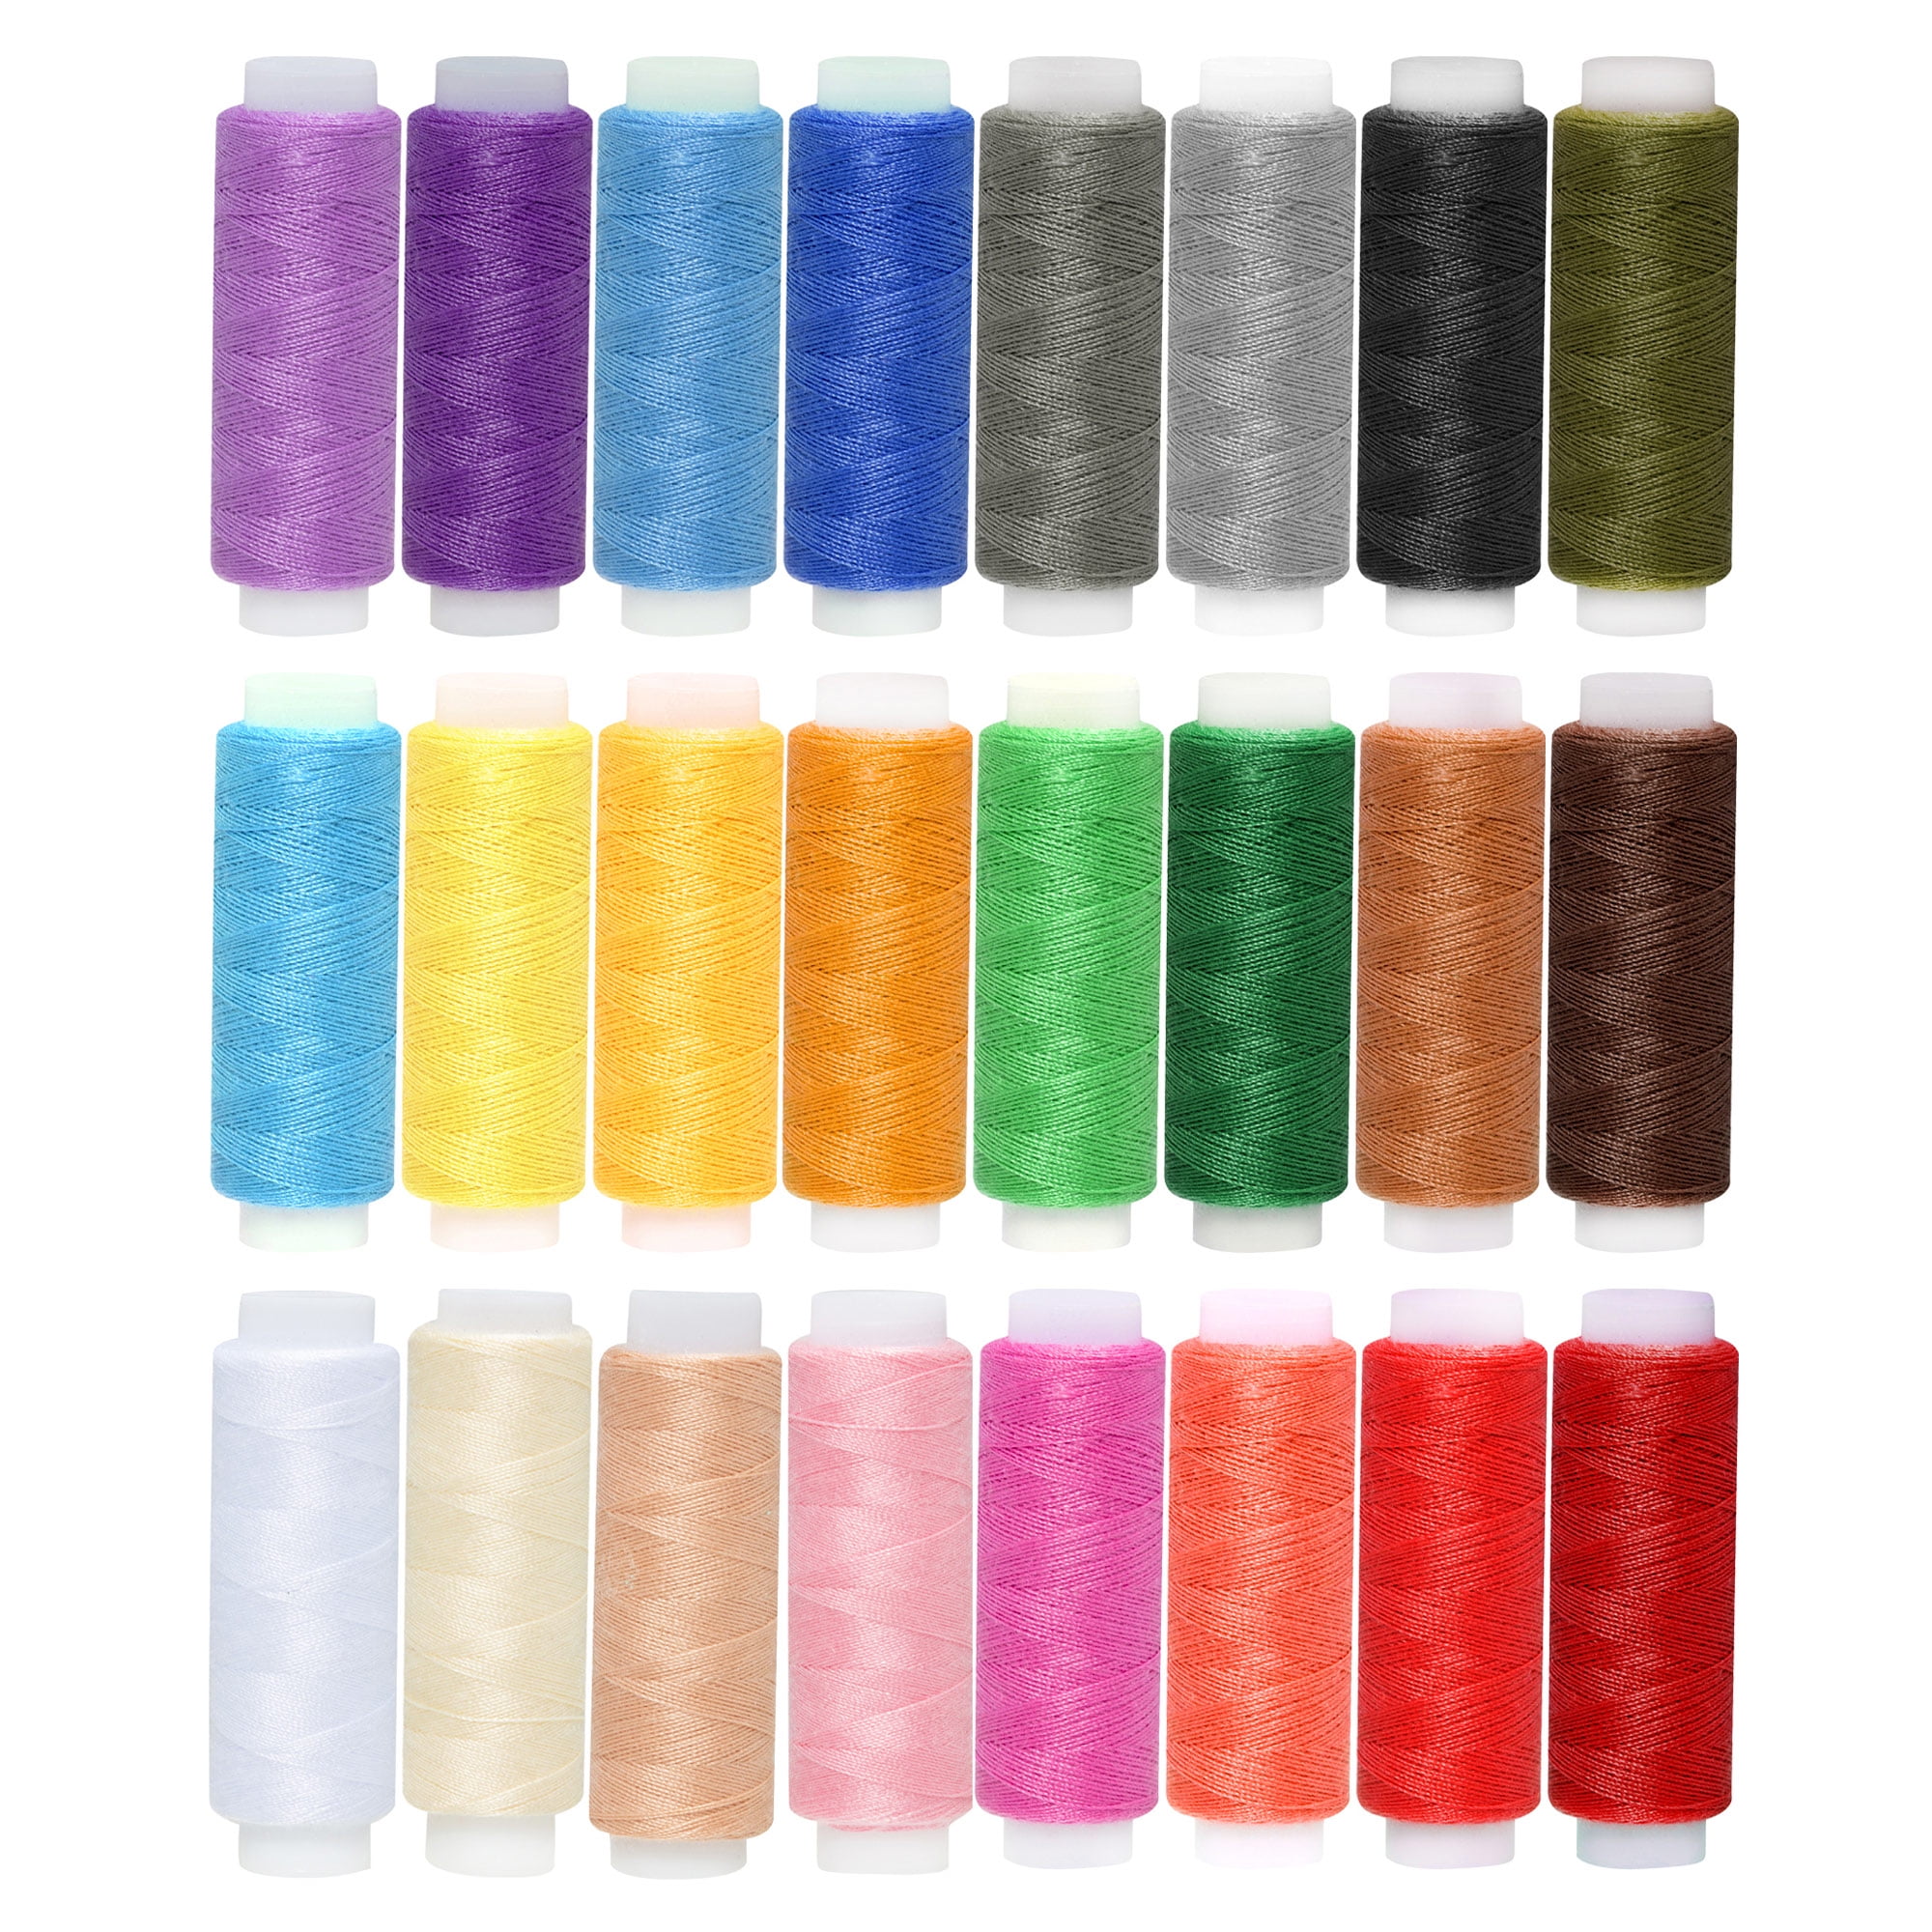 New Different colors Sewing machine line 100% polyester thread 200M each spool 